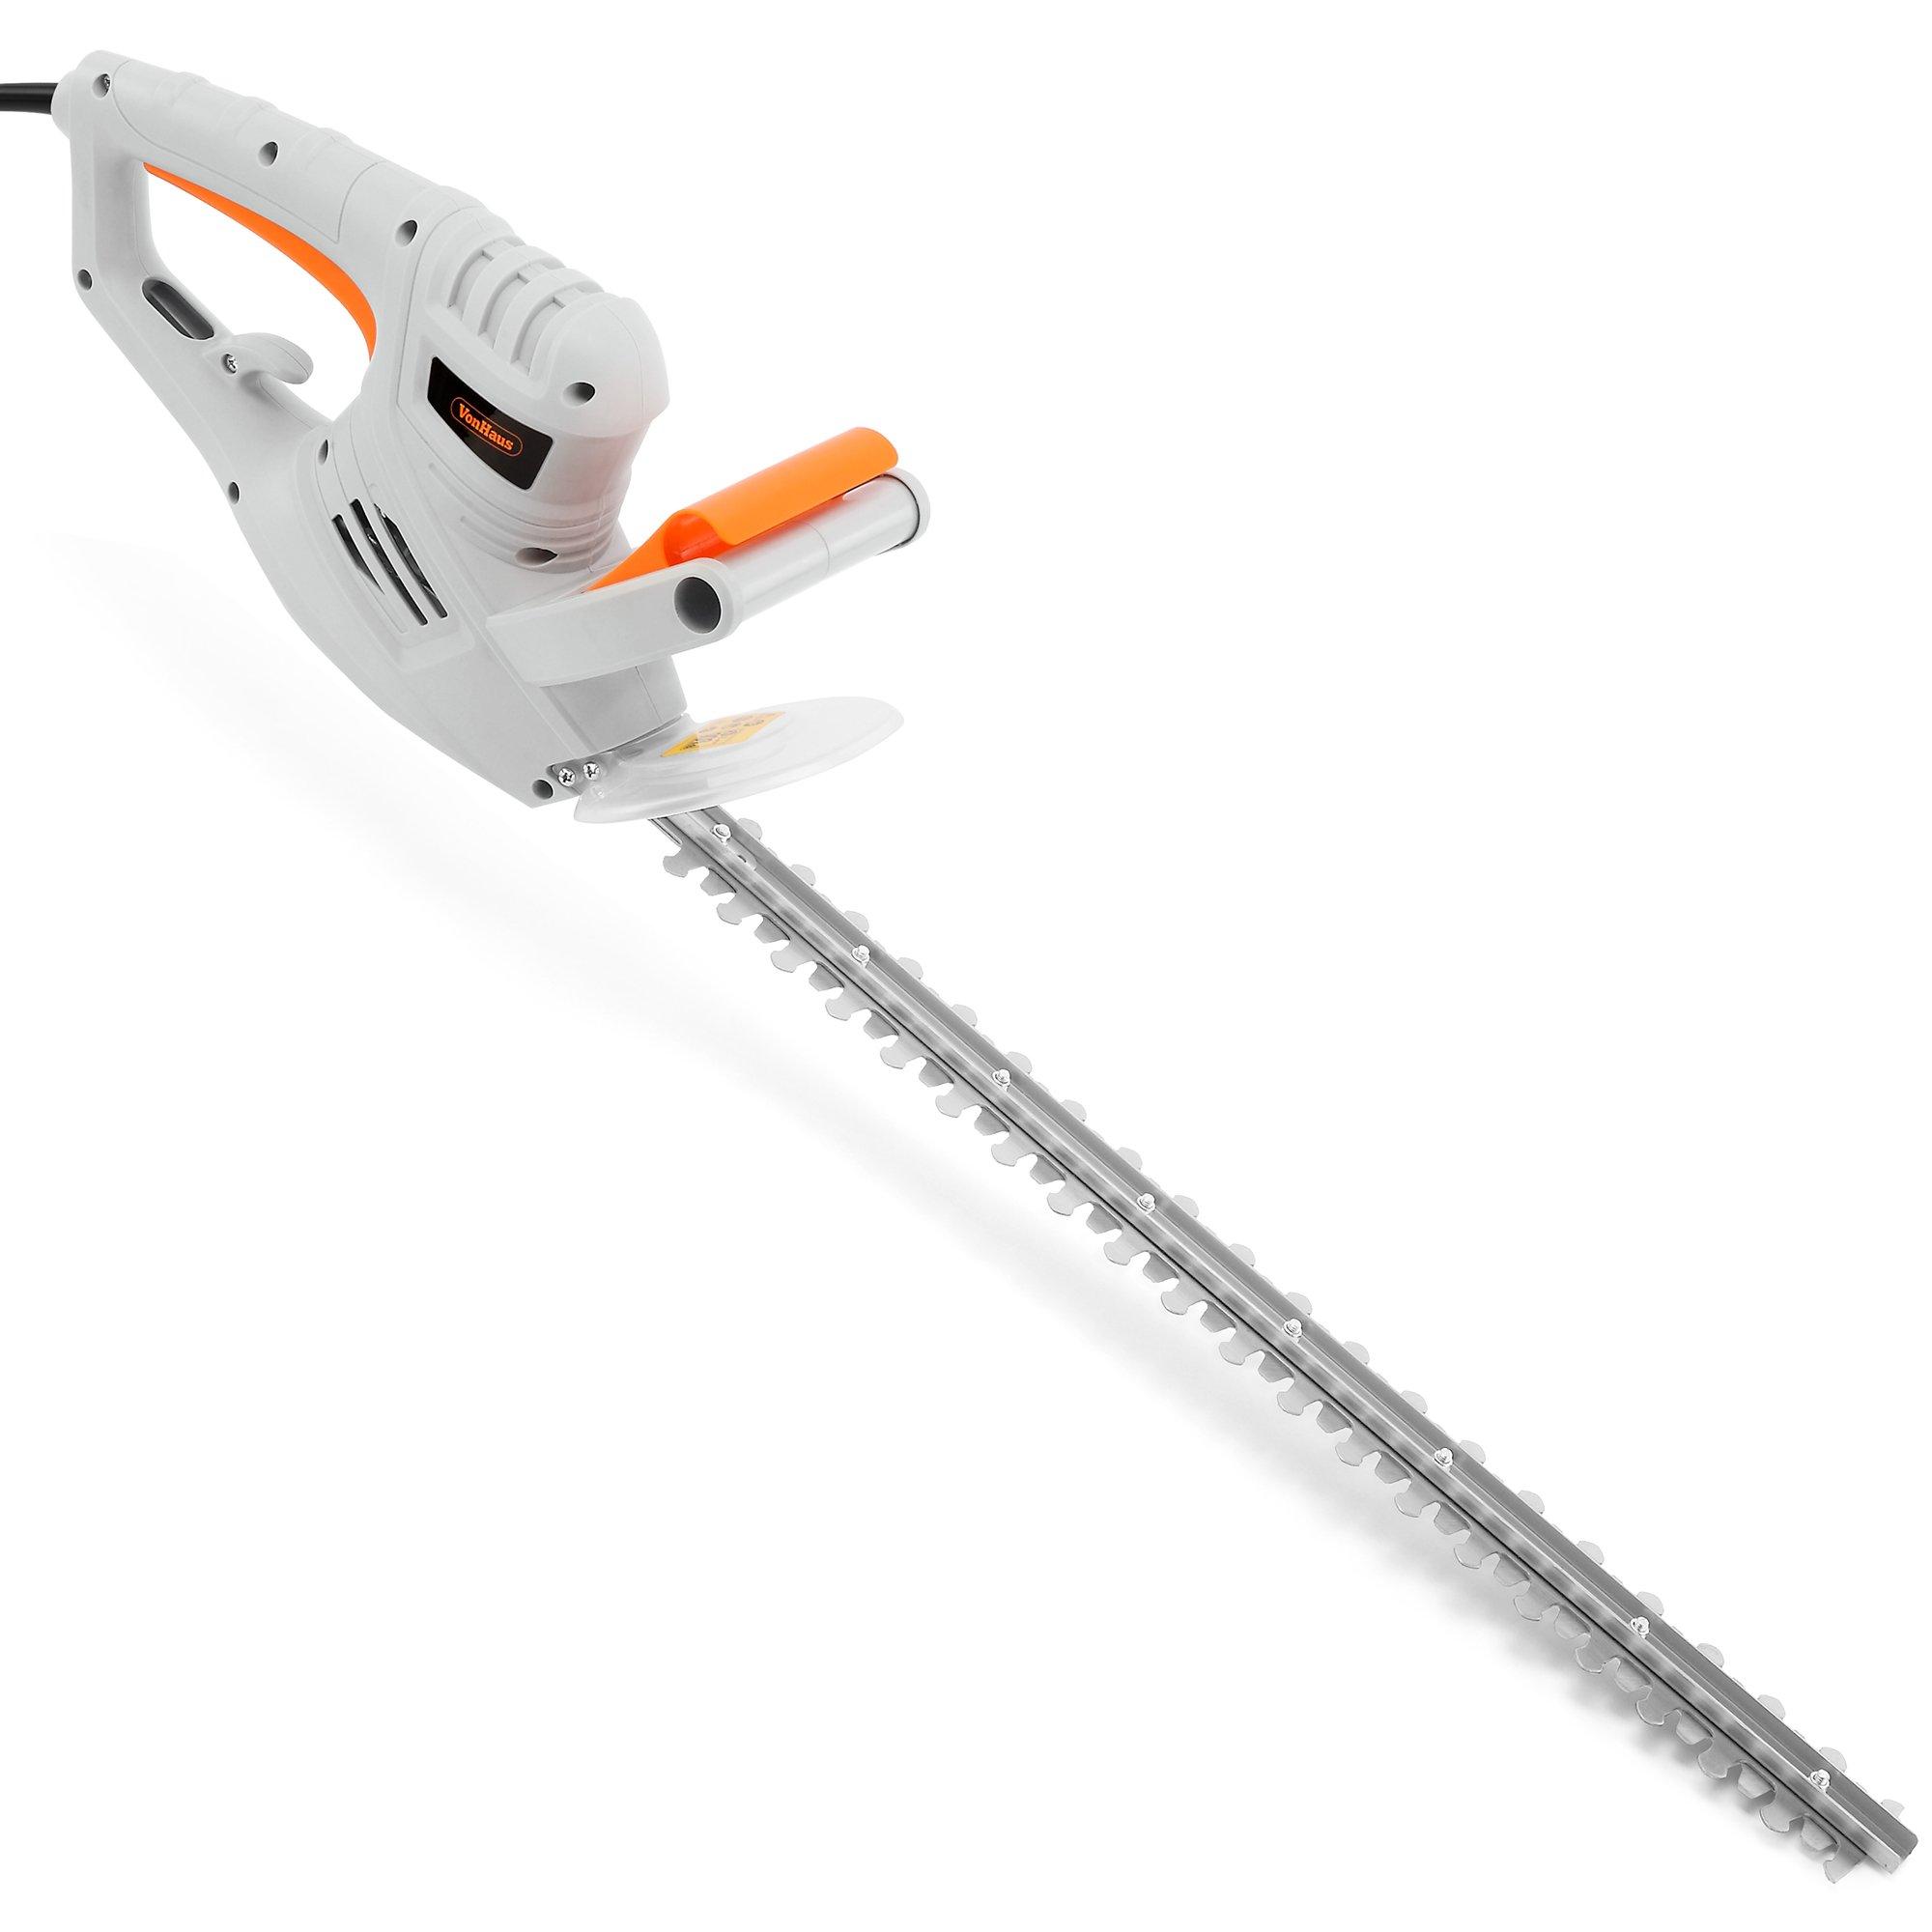 550W Electric Hedge Trimmer